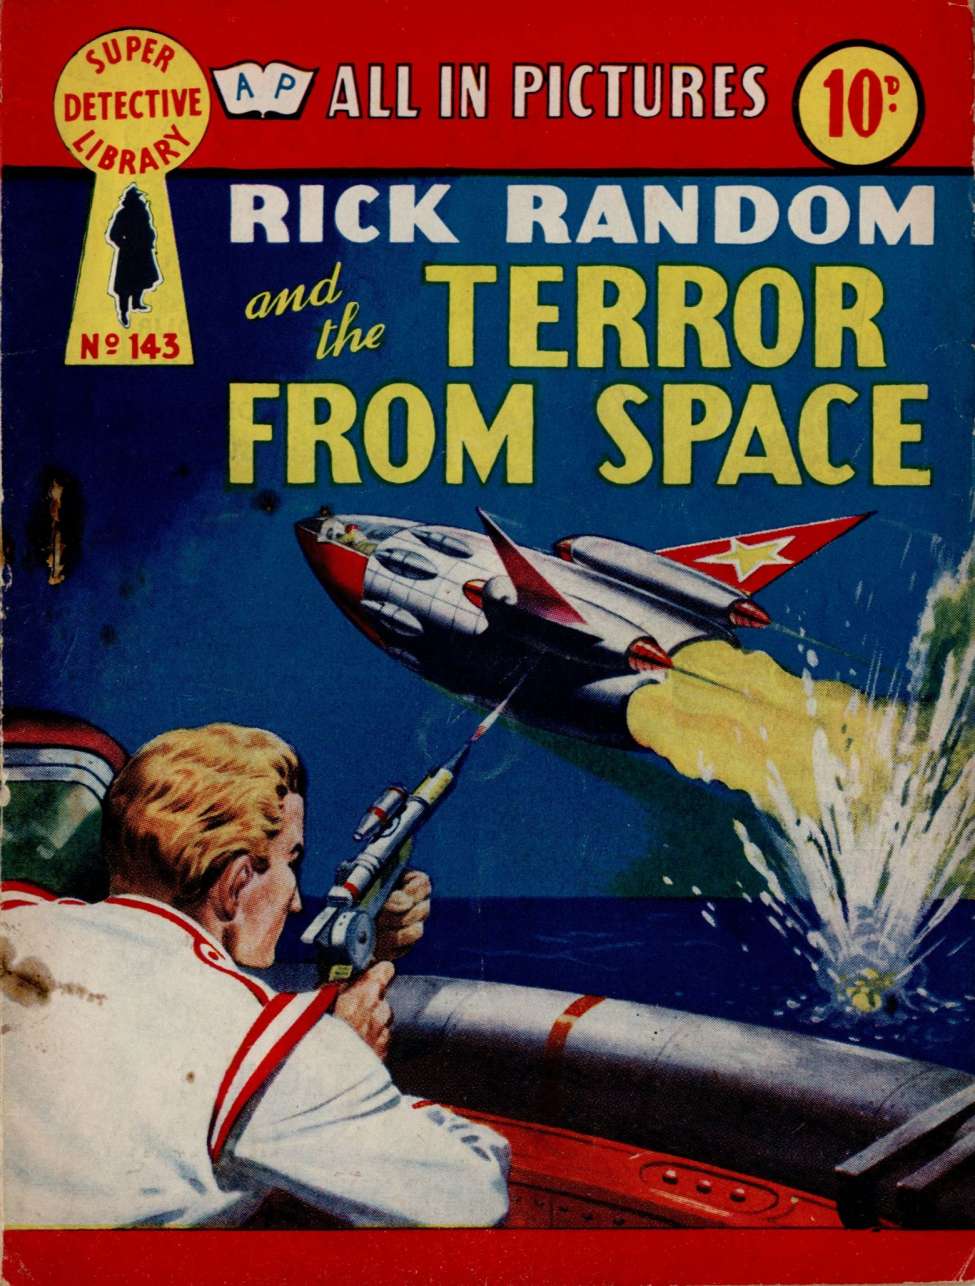 Book Cover For Super Detective Library 143 - The Terror from Space